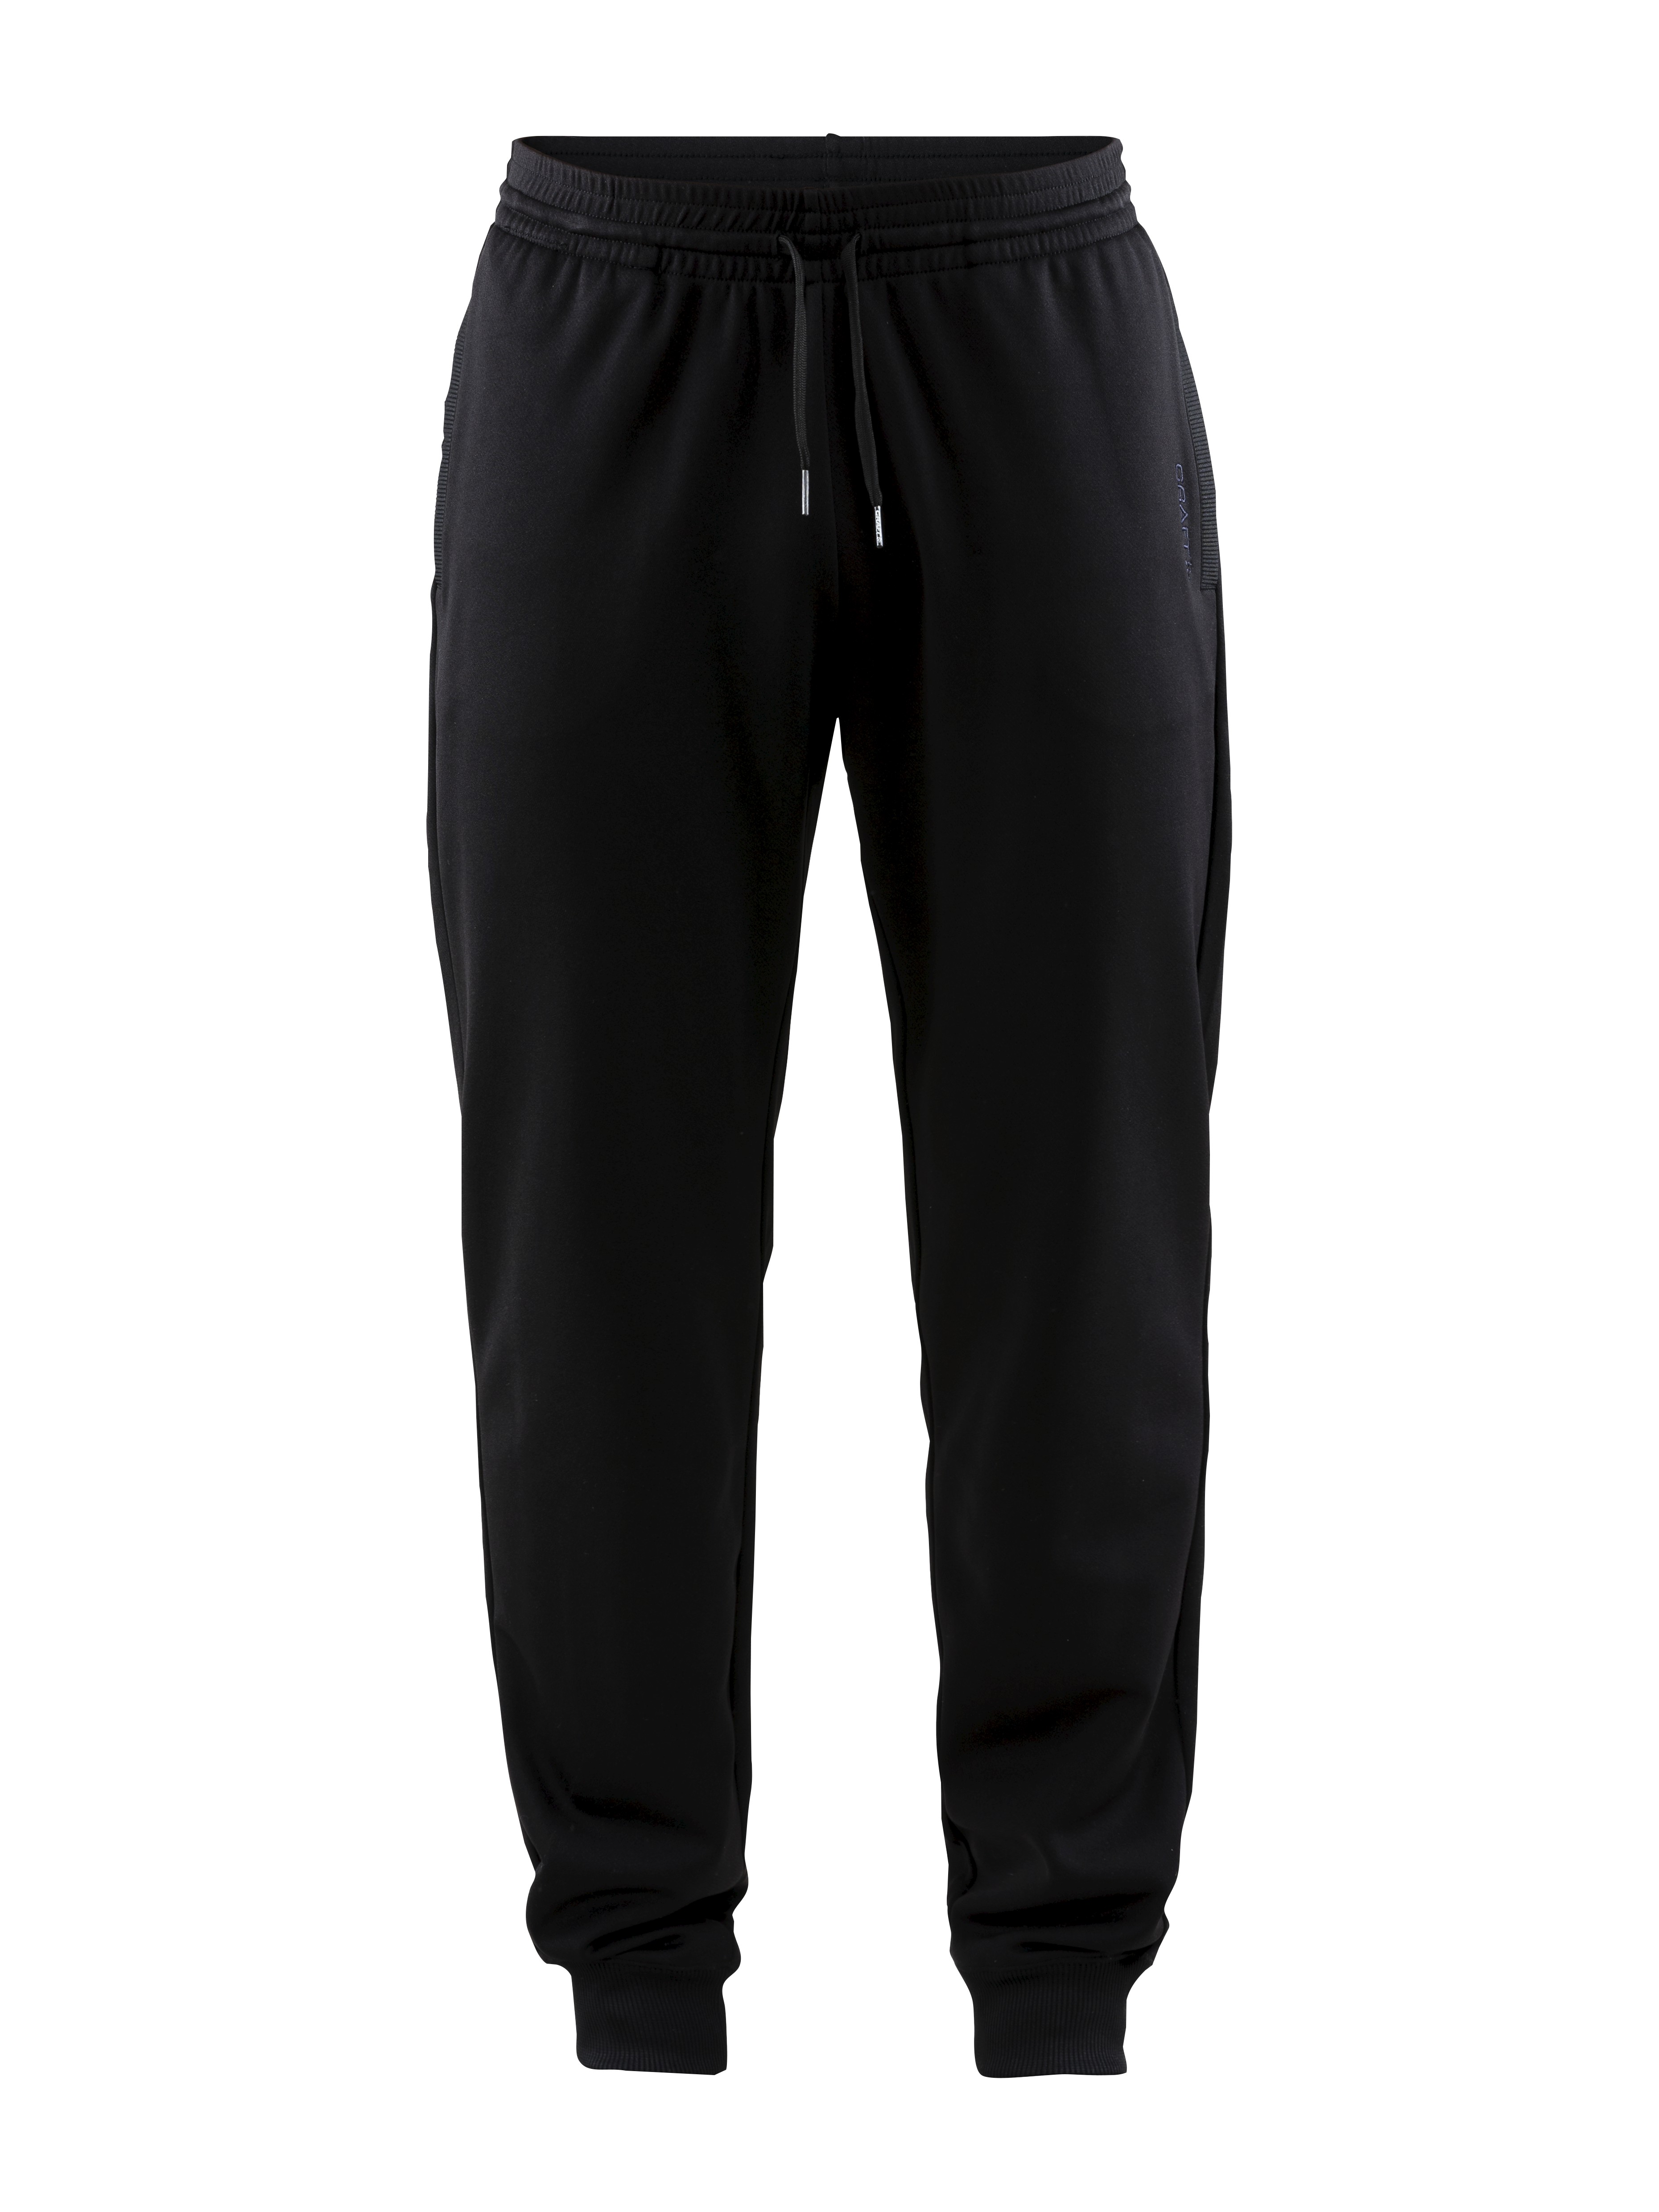 https://craft-products-production.imgix.net/images/1818_6433aa3300-1907566-999000_leisure_sweatpants_front-original.jpg